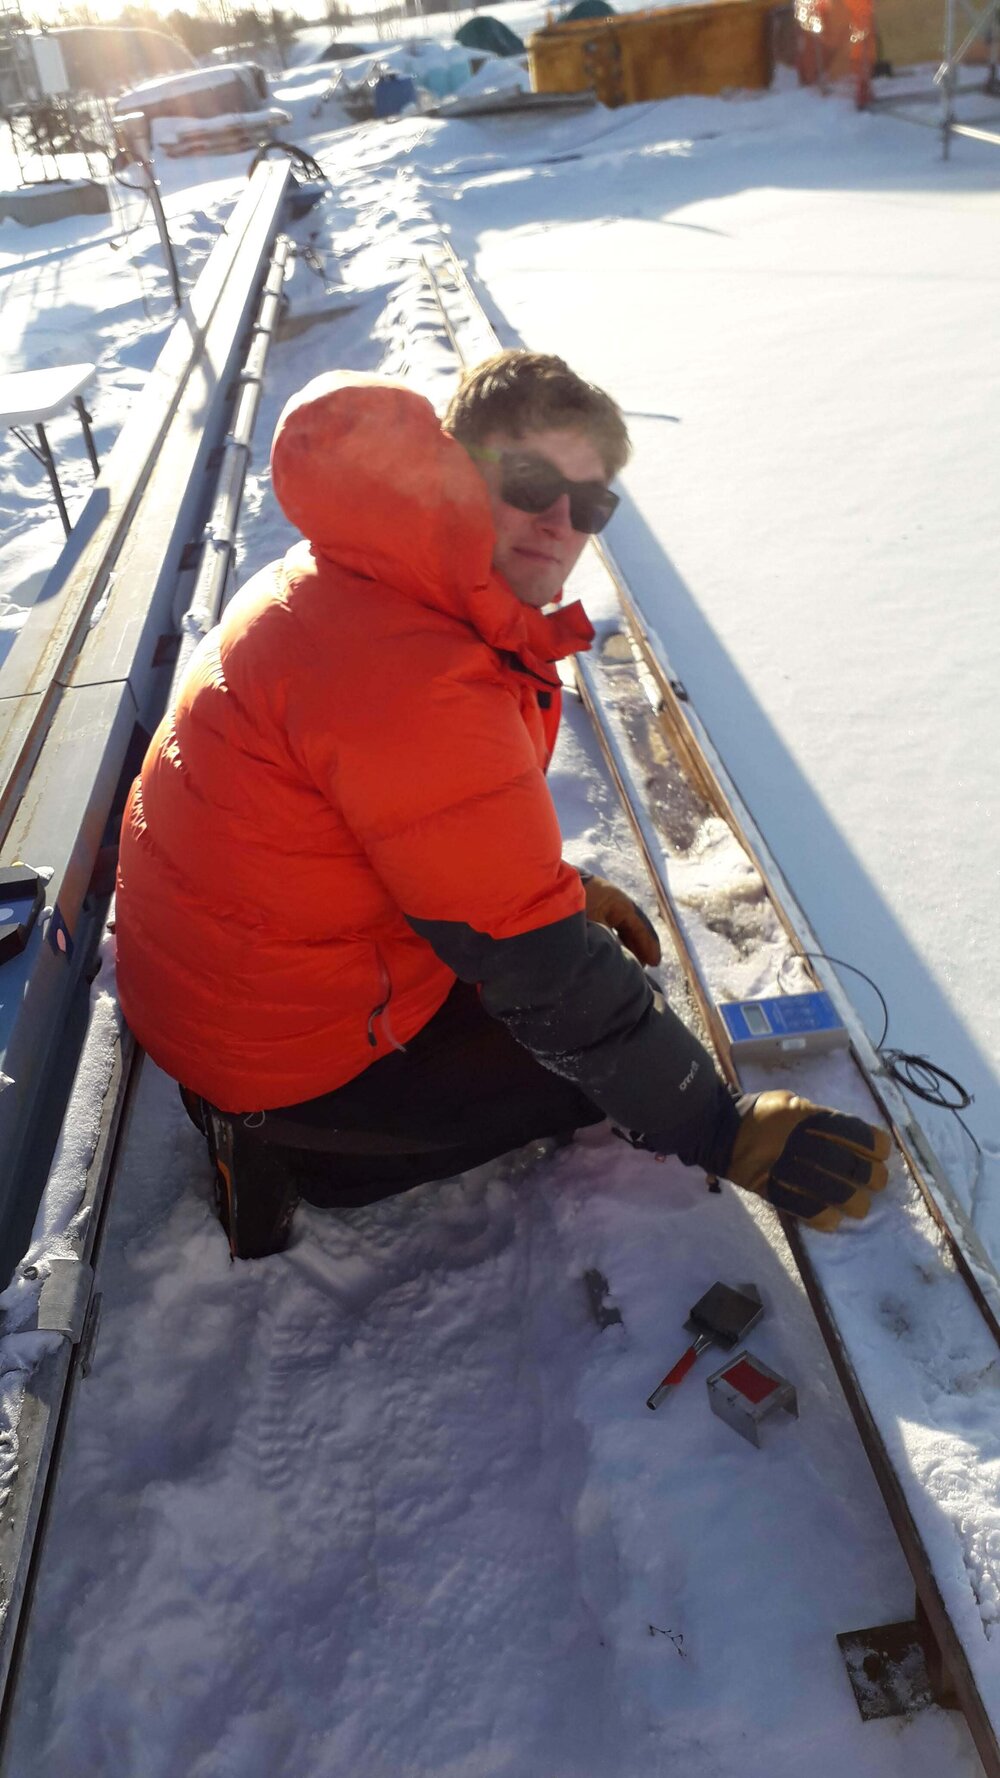 Robbie taking ice samples during an experiment at the University of Manitoba. Photo: Robbie Mallett